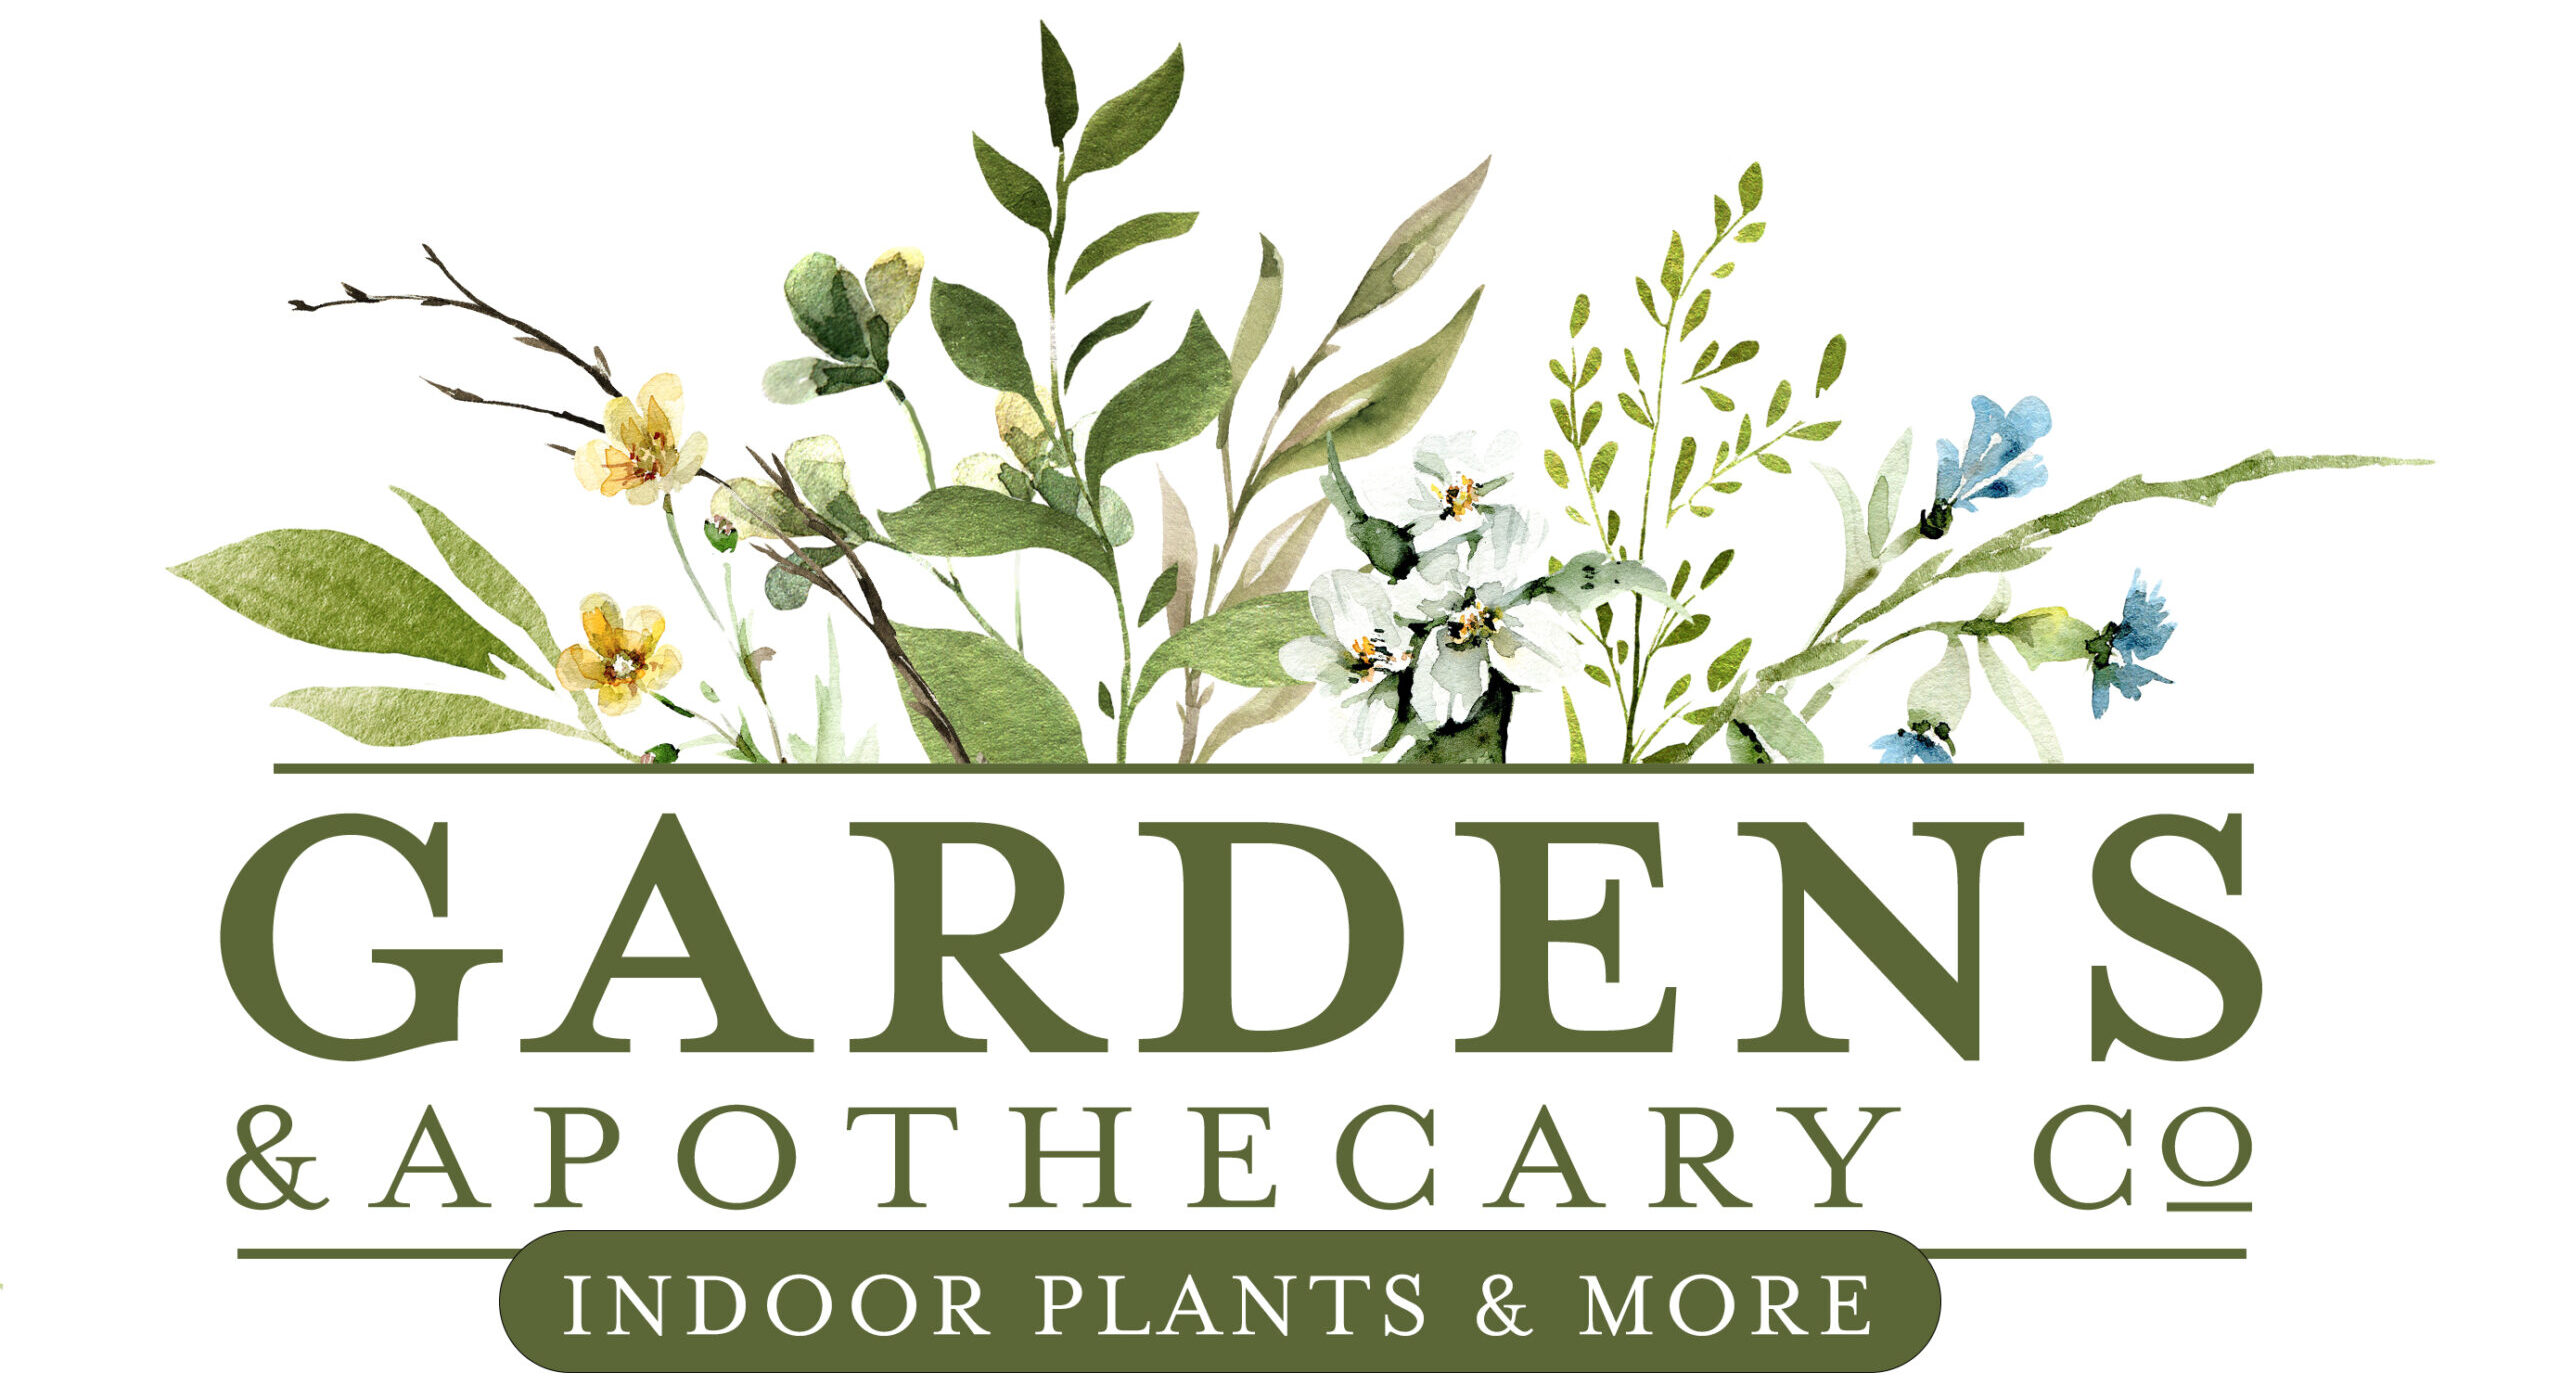 gardens apothecary.com a plant shop located in springfield, Tennessee offering educational classes on plant care and gardening.